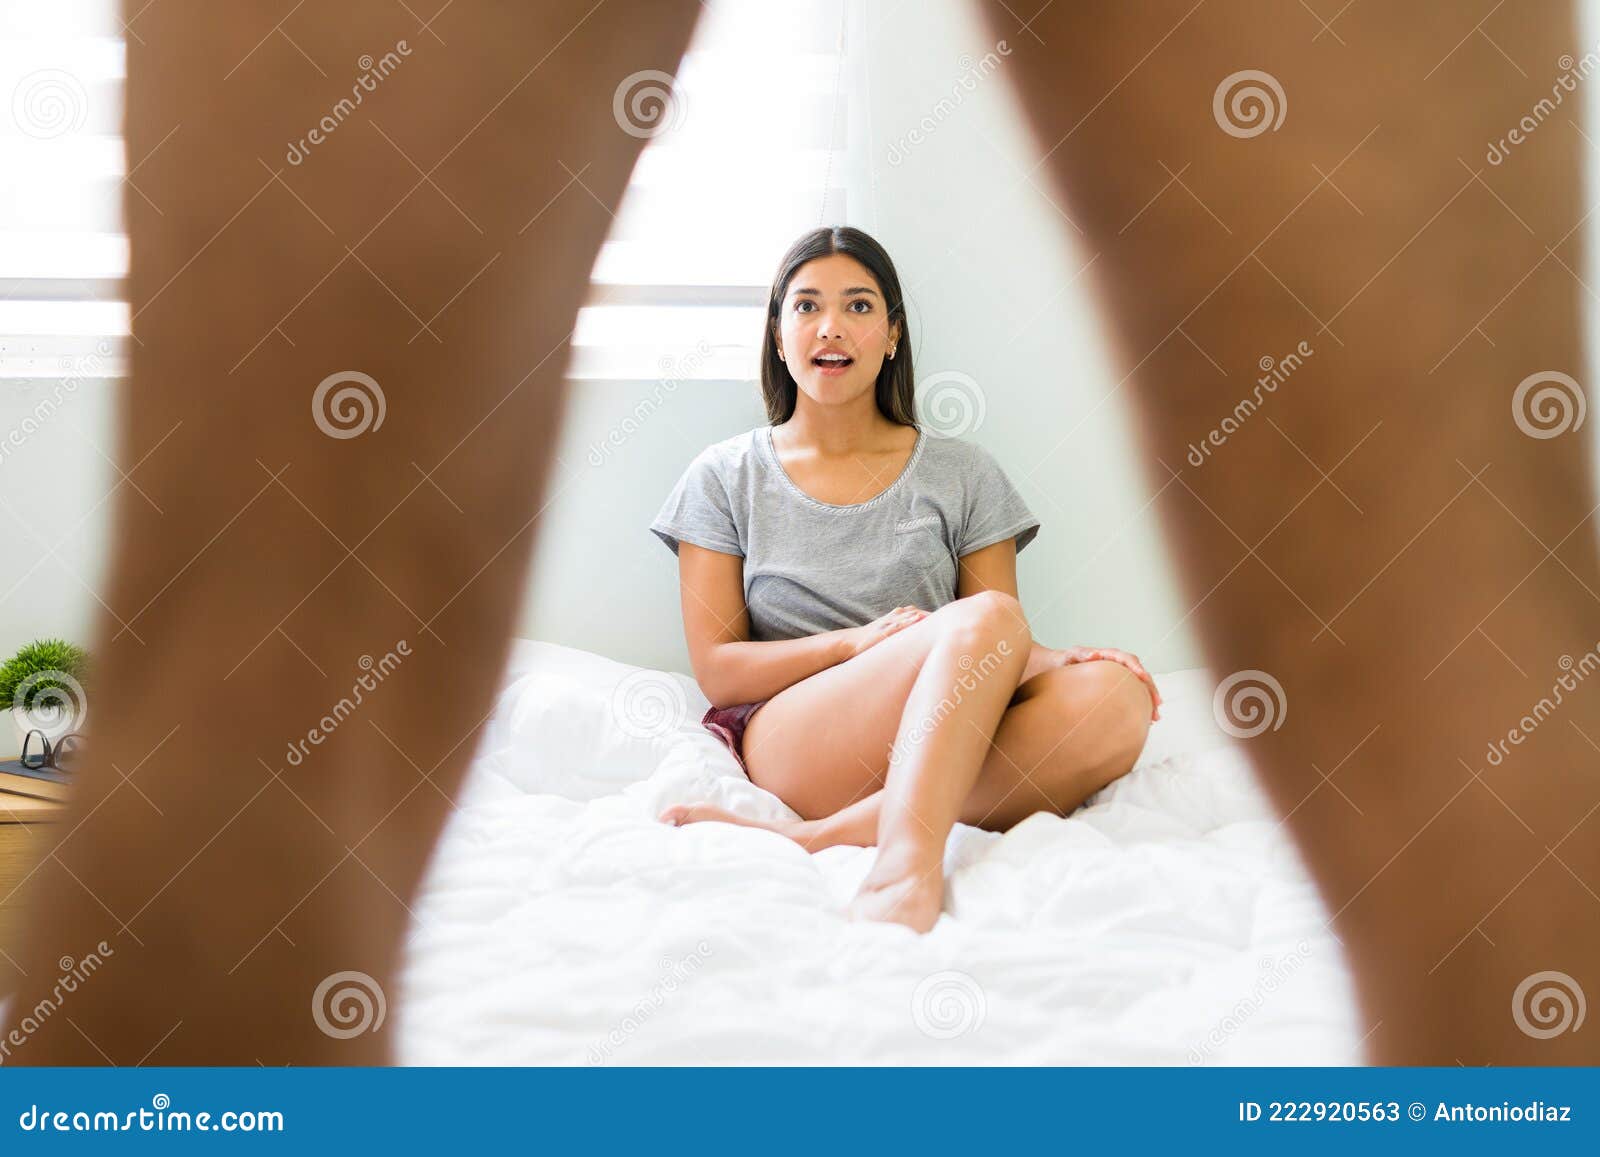 Surprised Girlfriend Feeling Happy before Sex Stock Image image photo pic